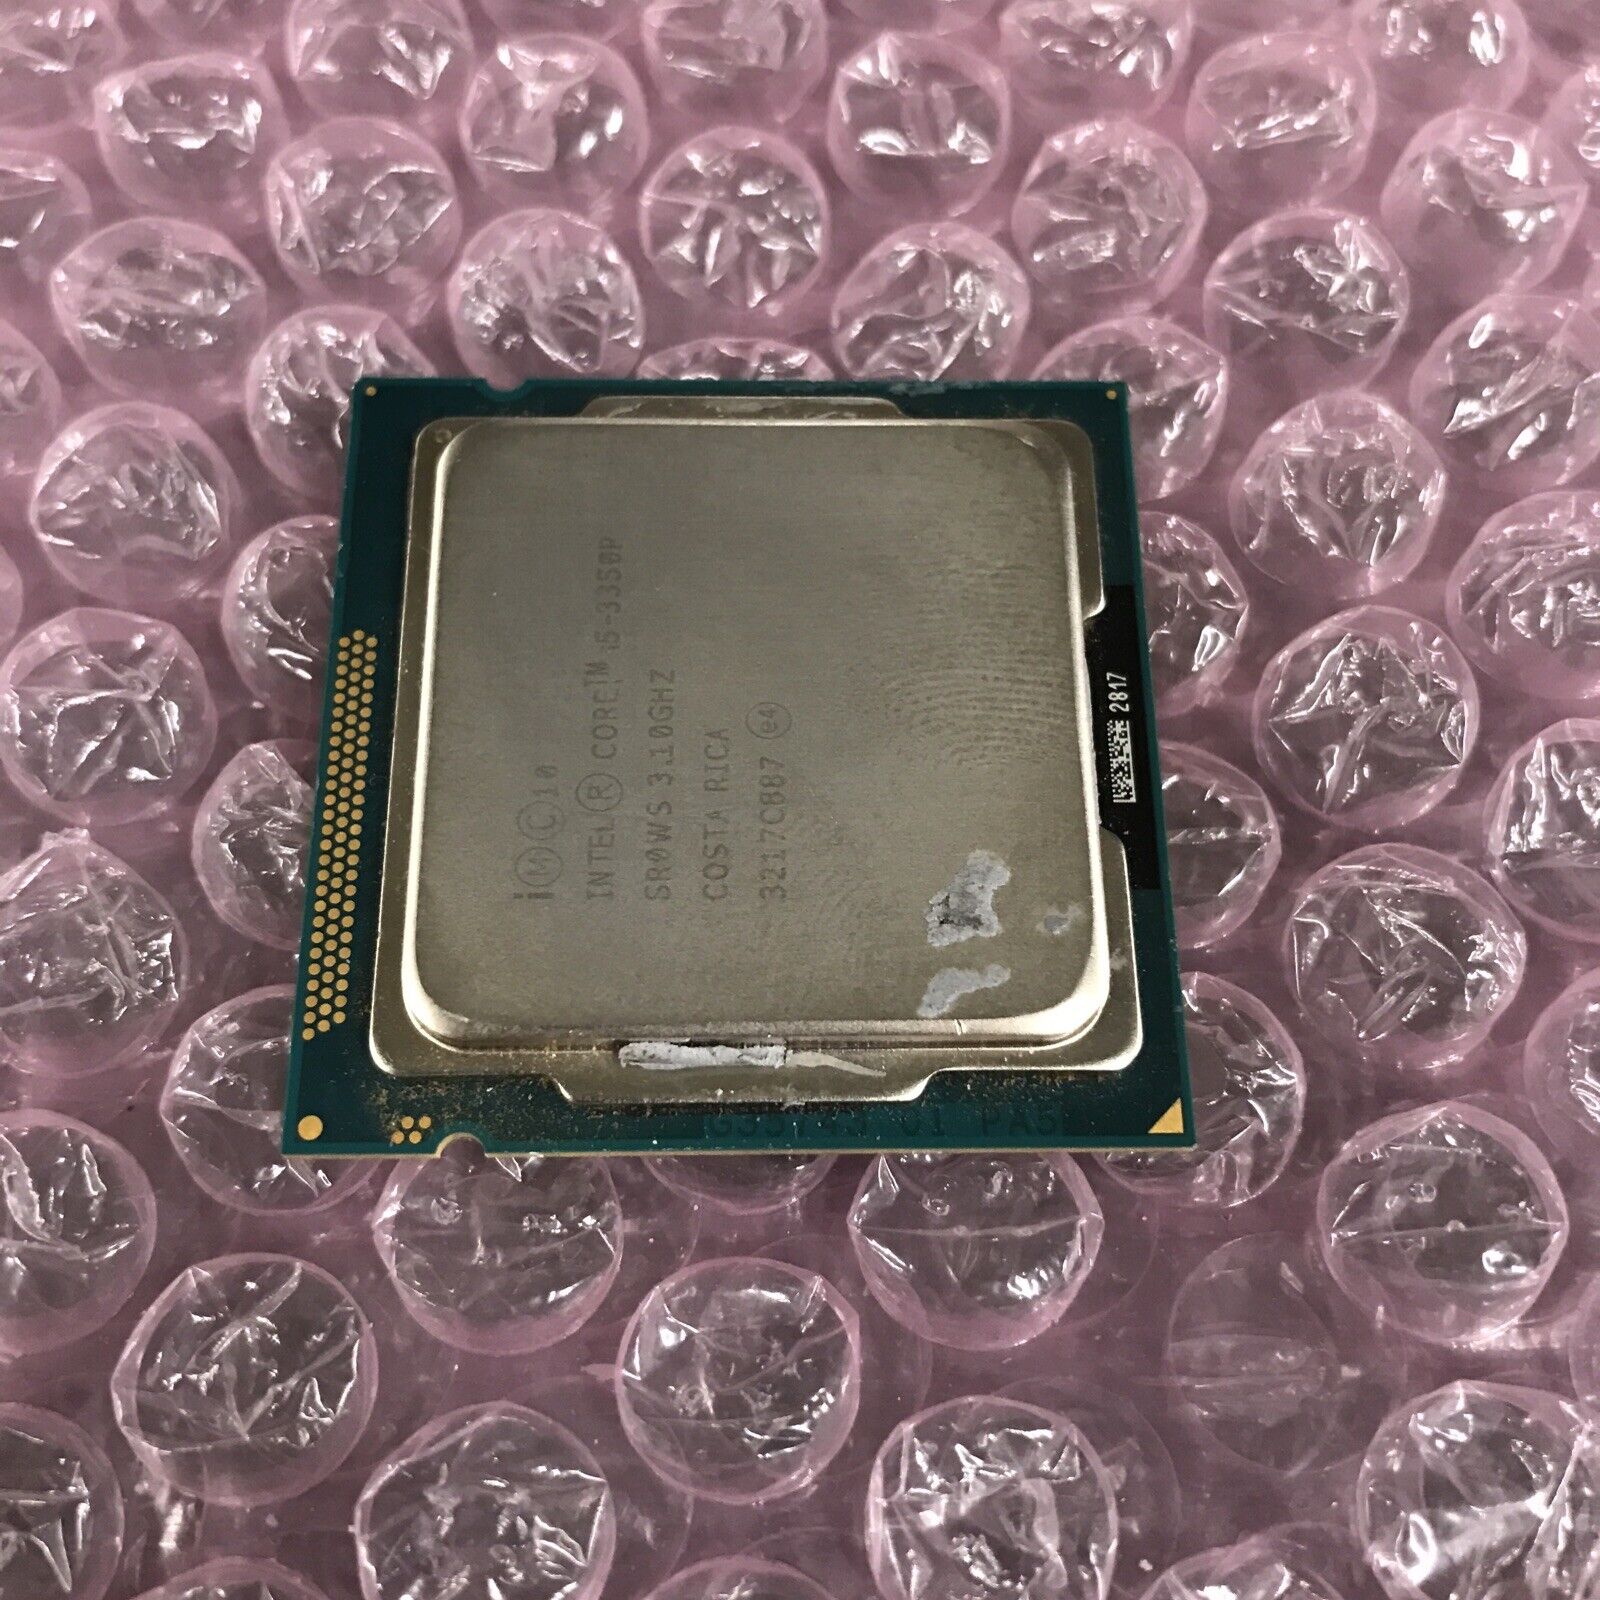 Intel Core i5-3350P SR0WS 3.1GHZ (Tested and Working)